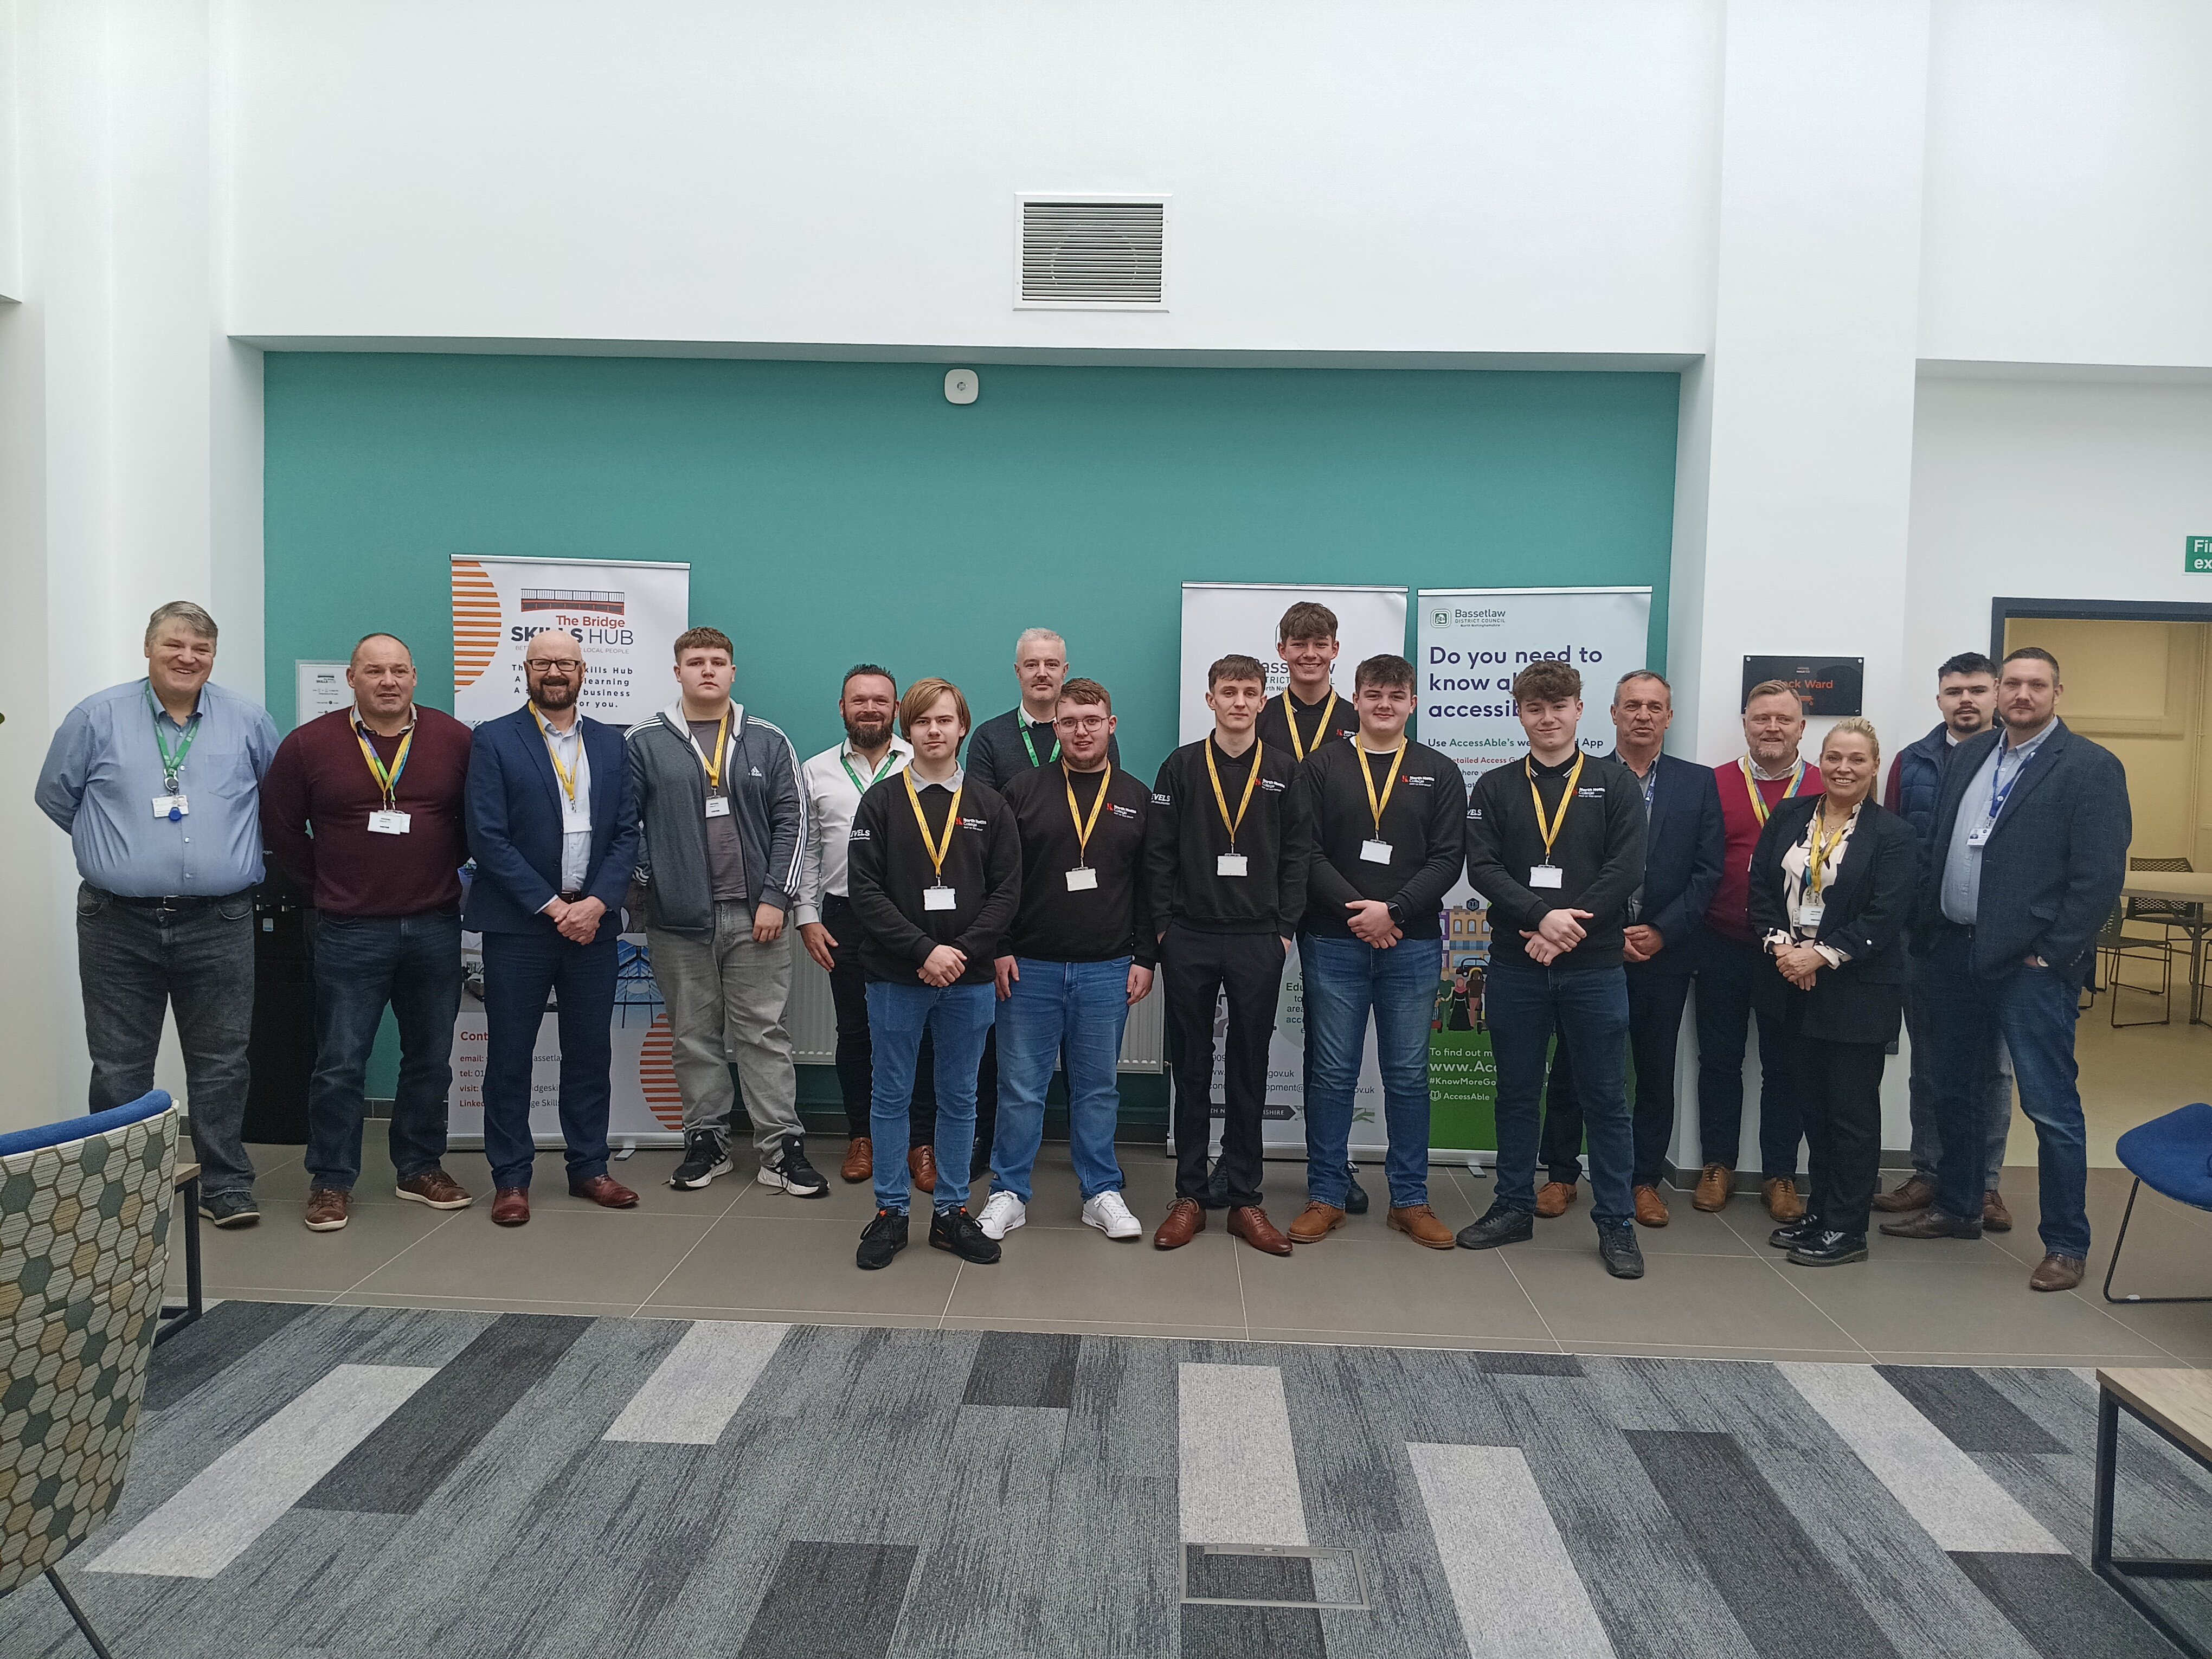 Students inspired by housing professionals